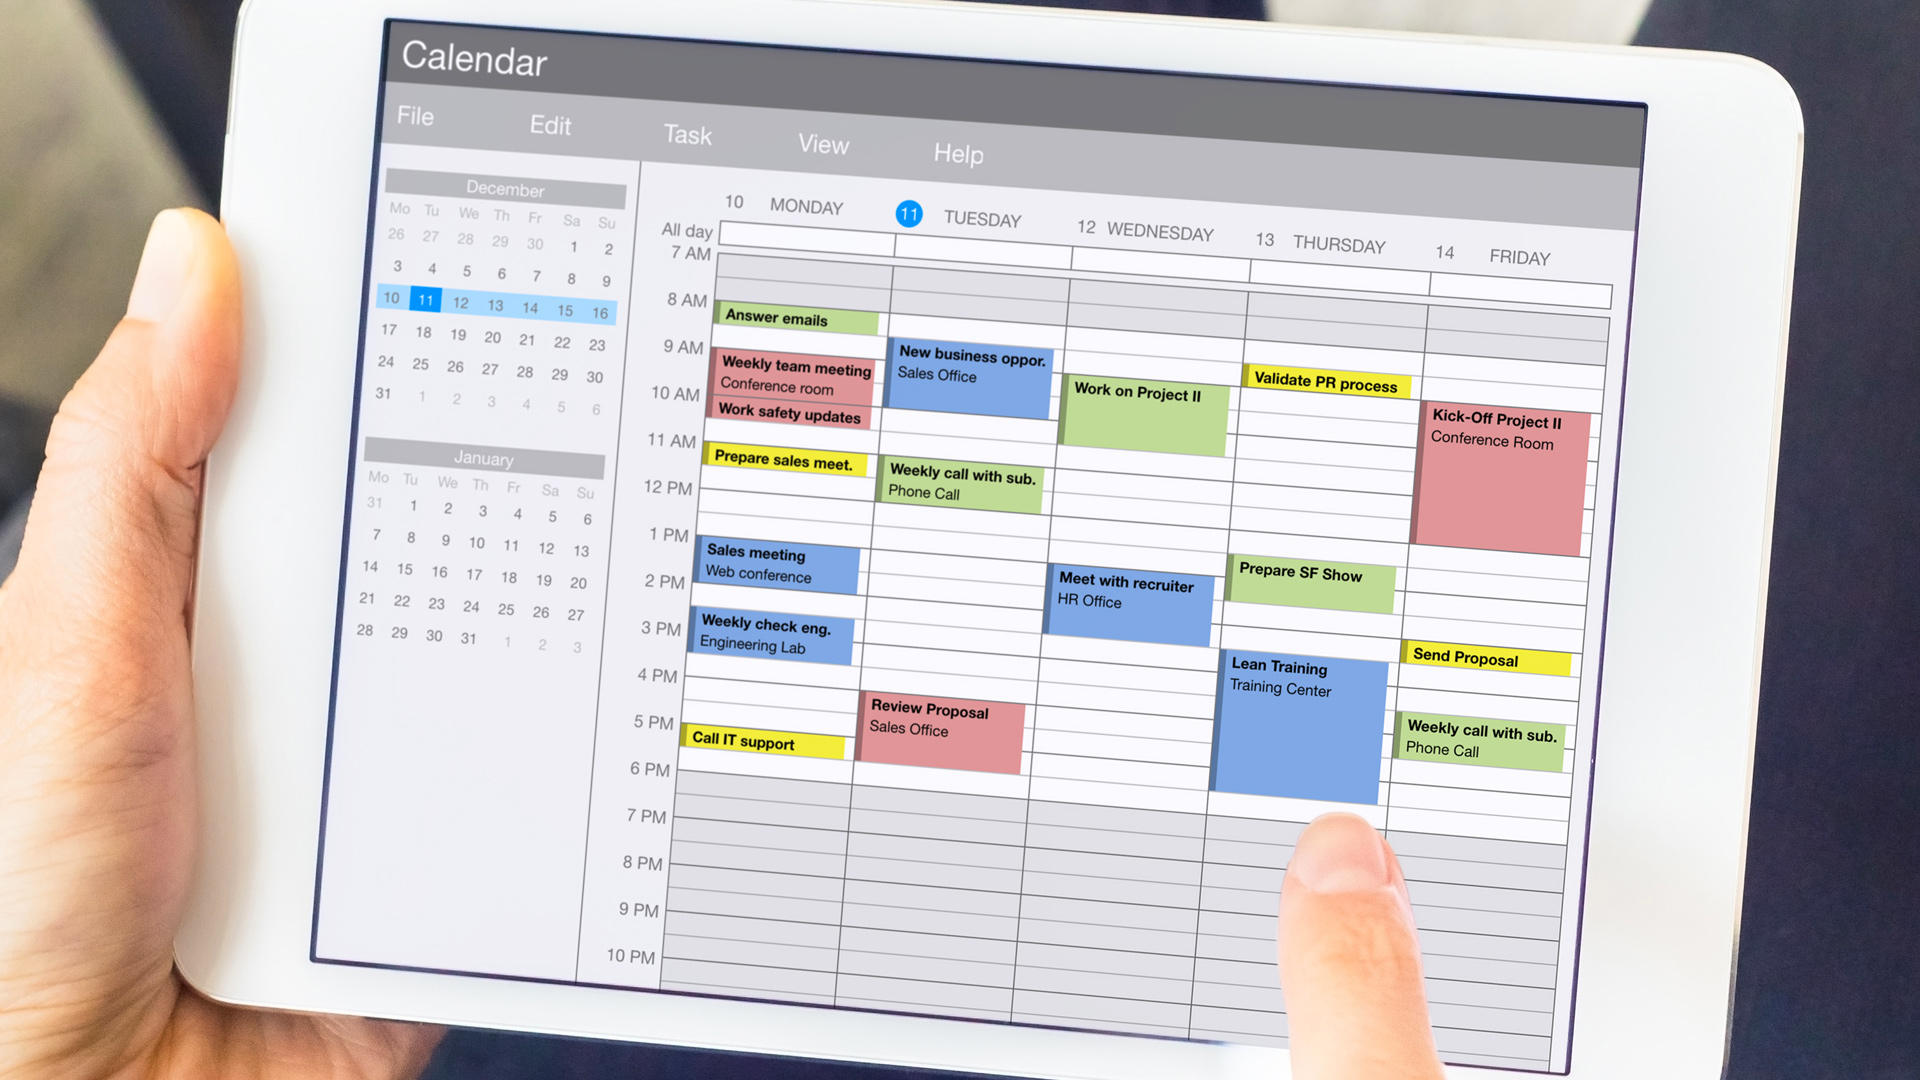 Schedule on a screen of a tablet.